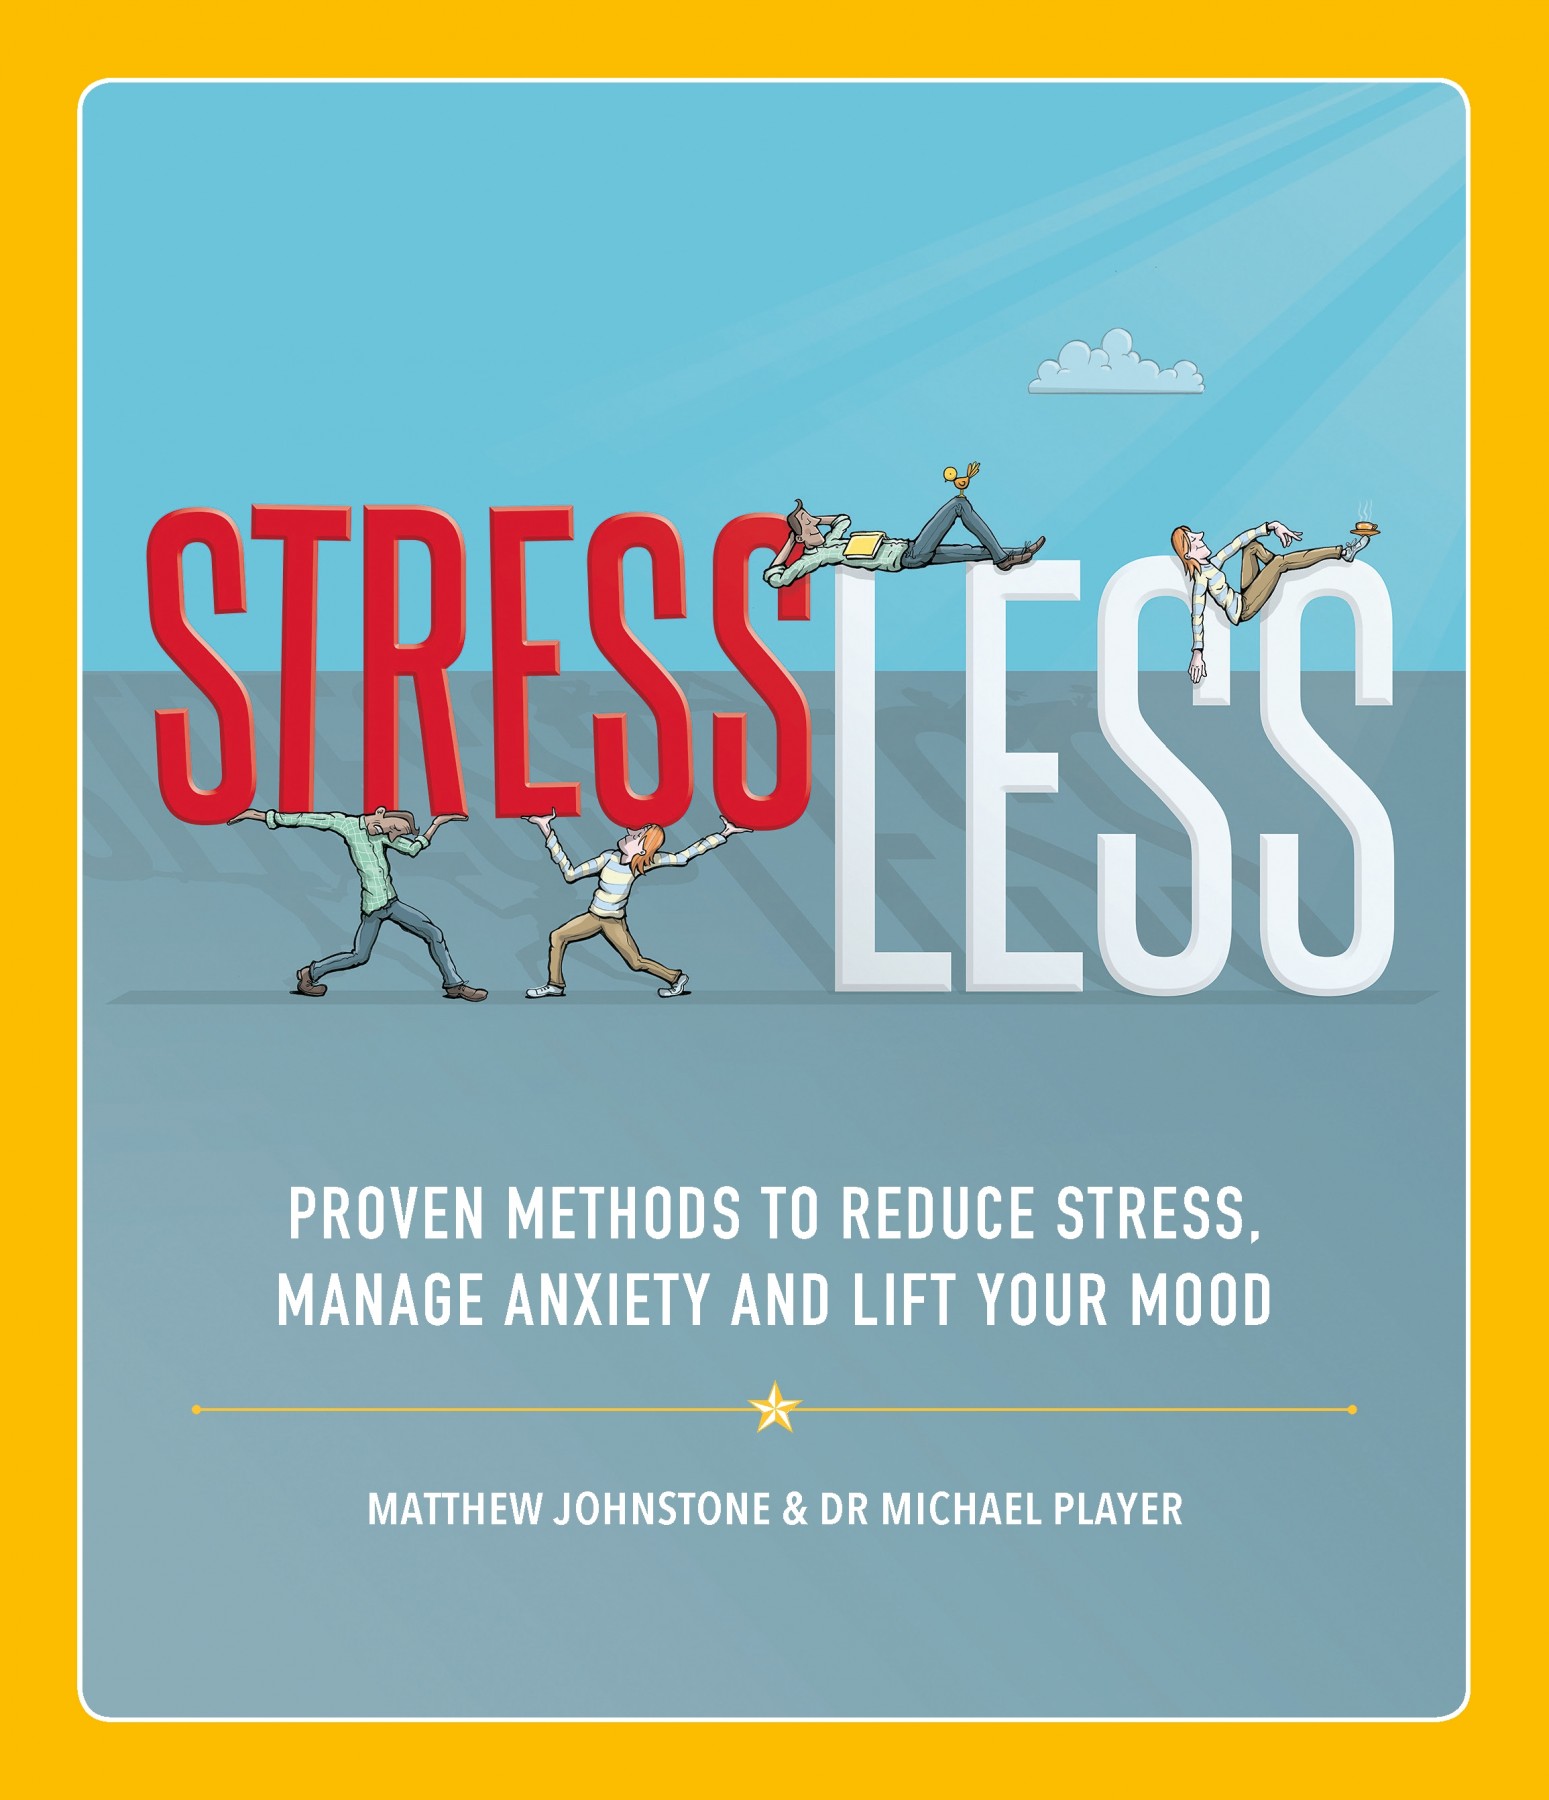 StressLess: Proven methods to reduce stress, manage anxiety and lift your mood